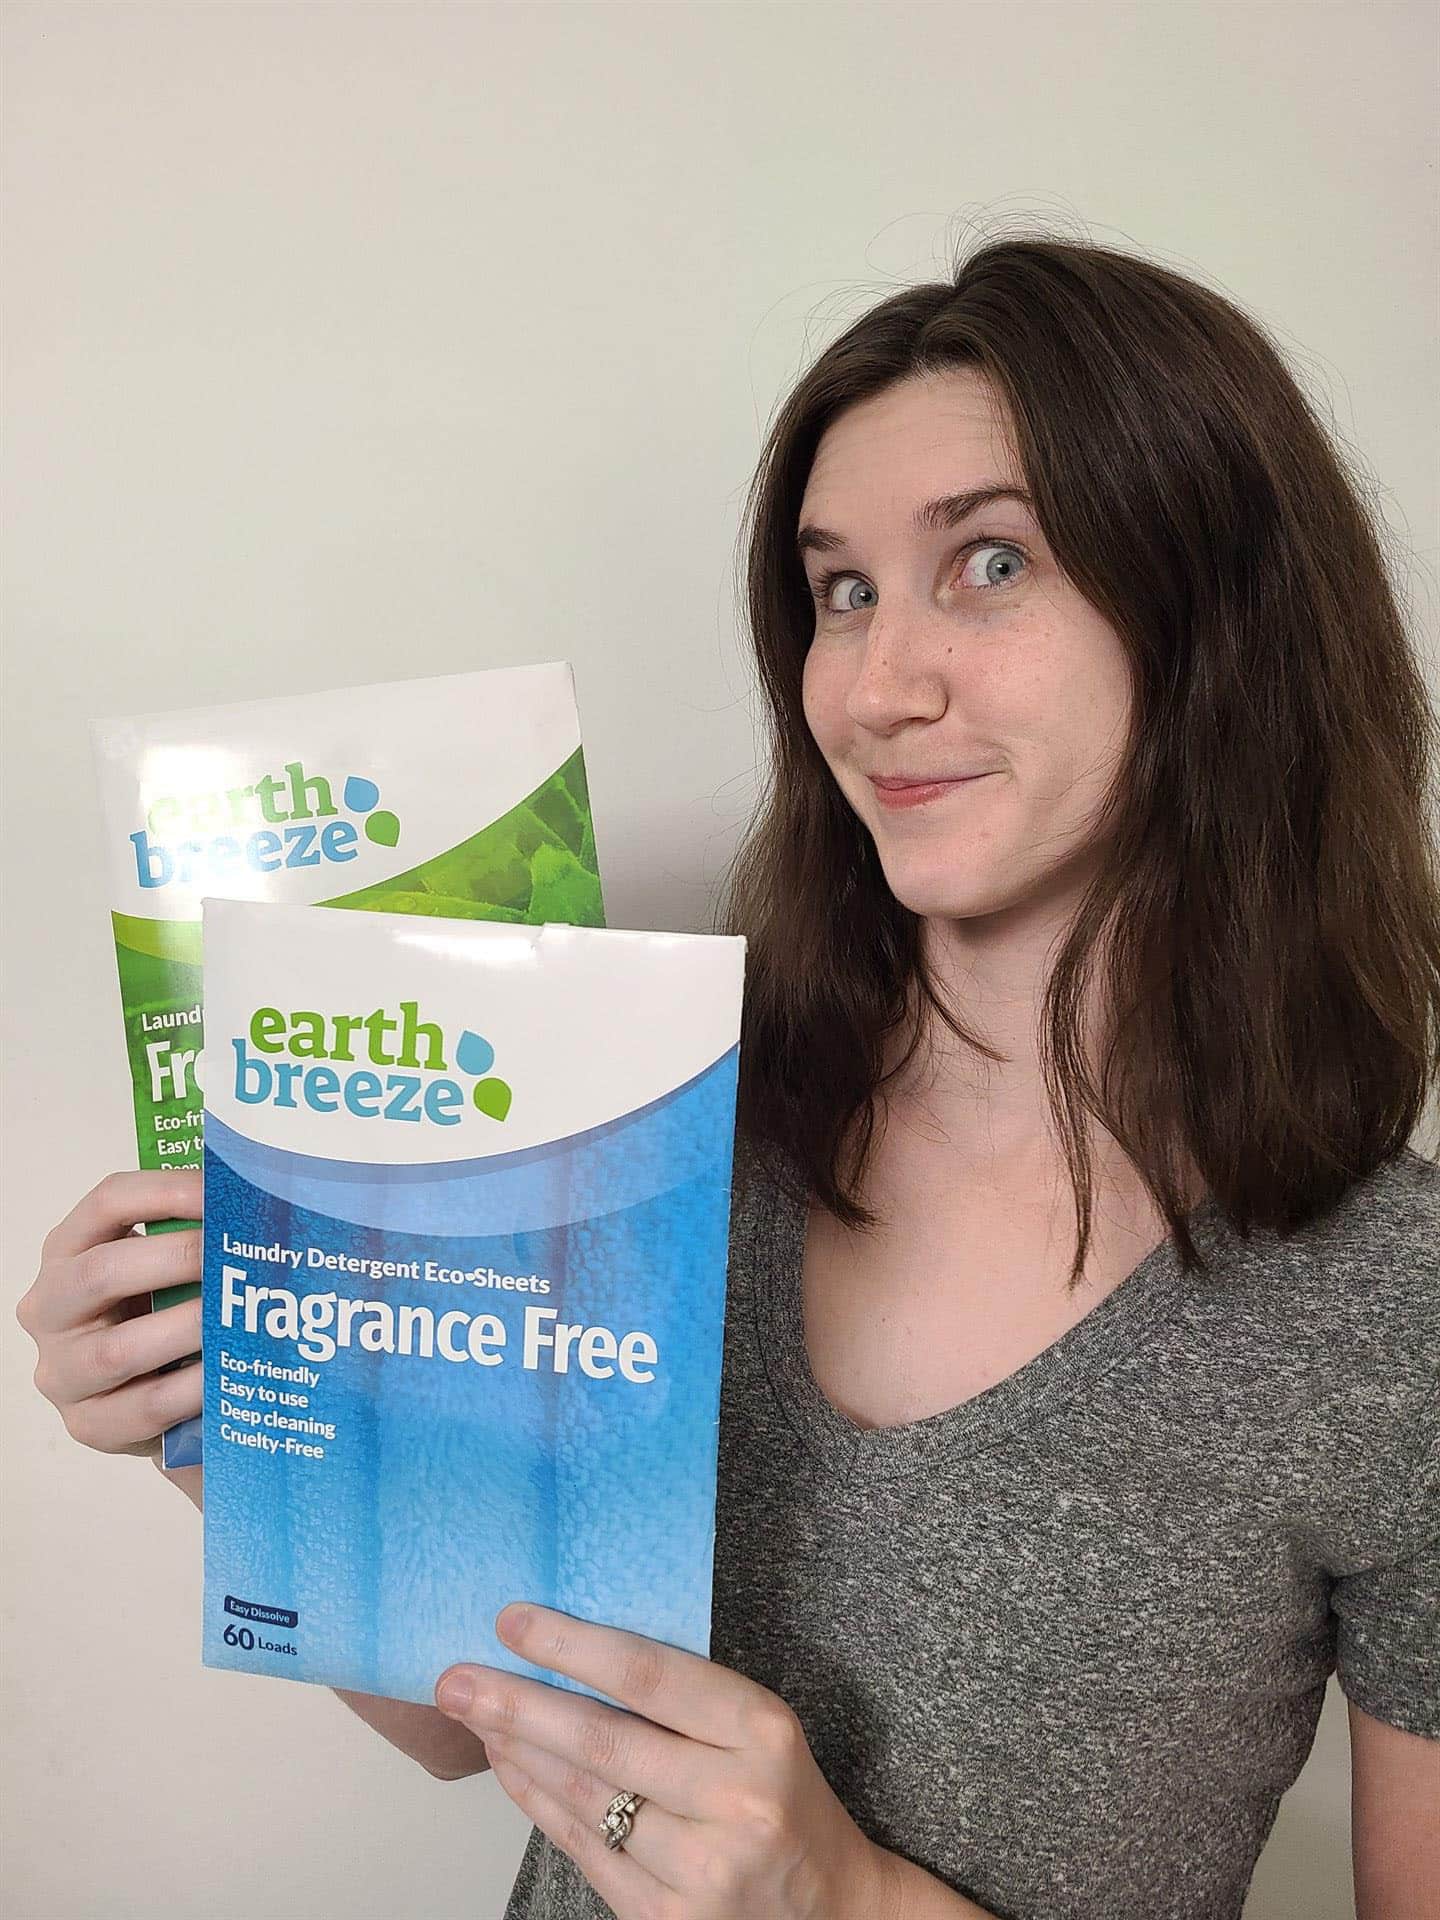 earth breeze review - best eco-friendly laundry detergent sheets being held by woman